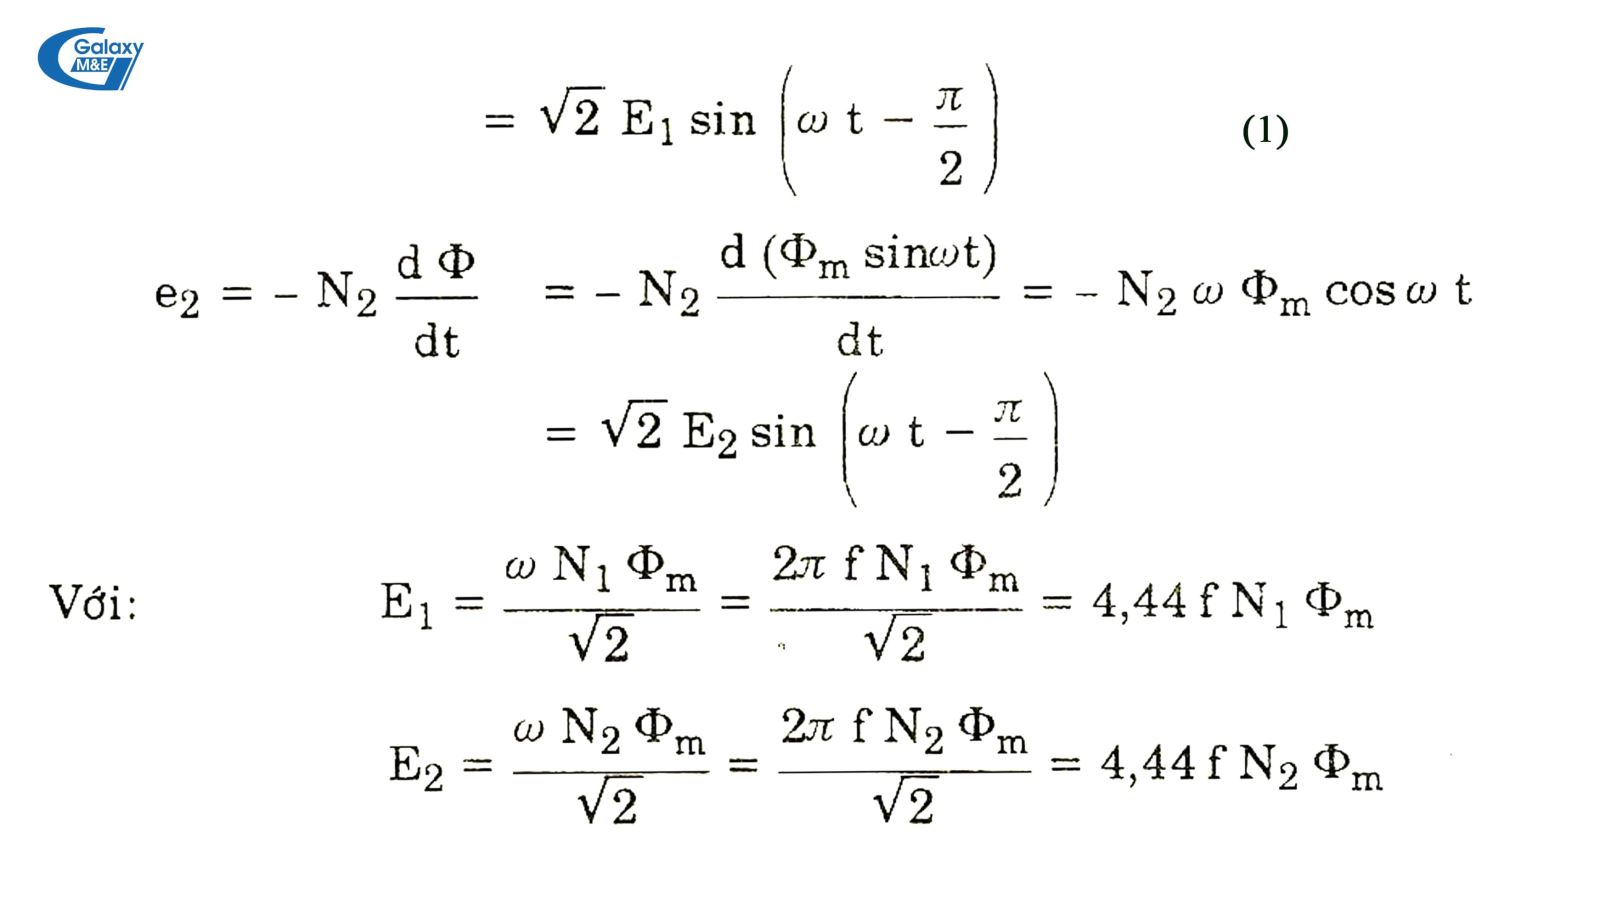 The formula for calculating the electromotive force is based on the law of electromagnetic induction.